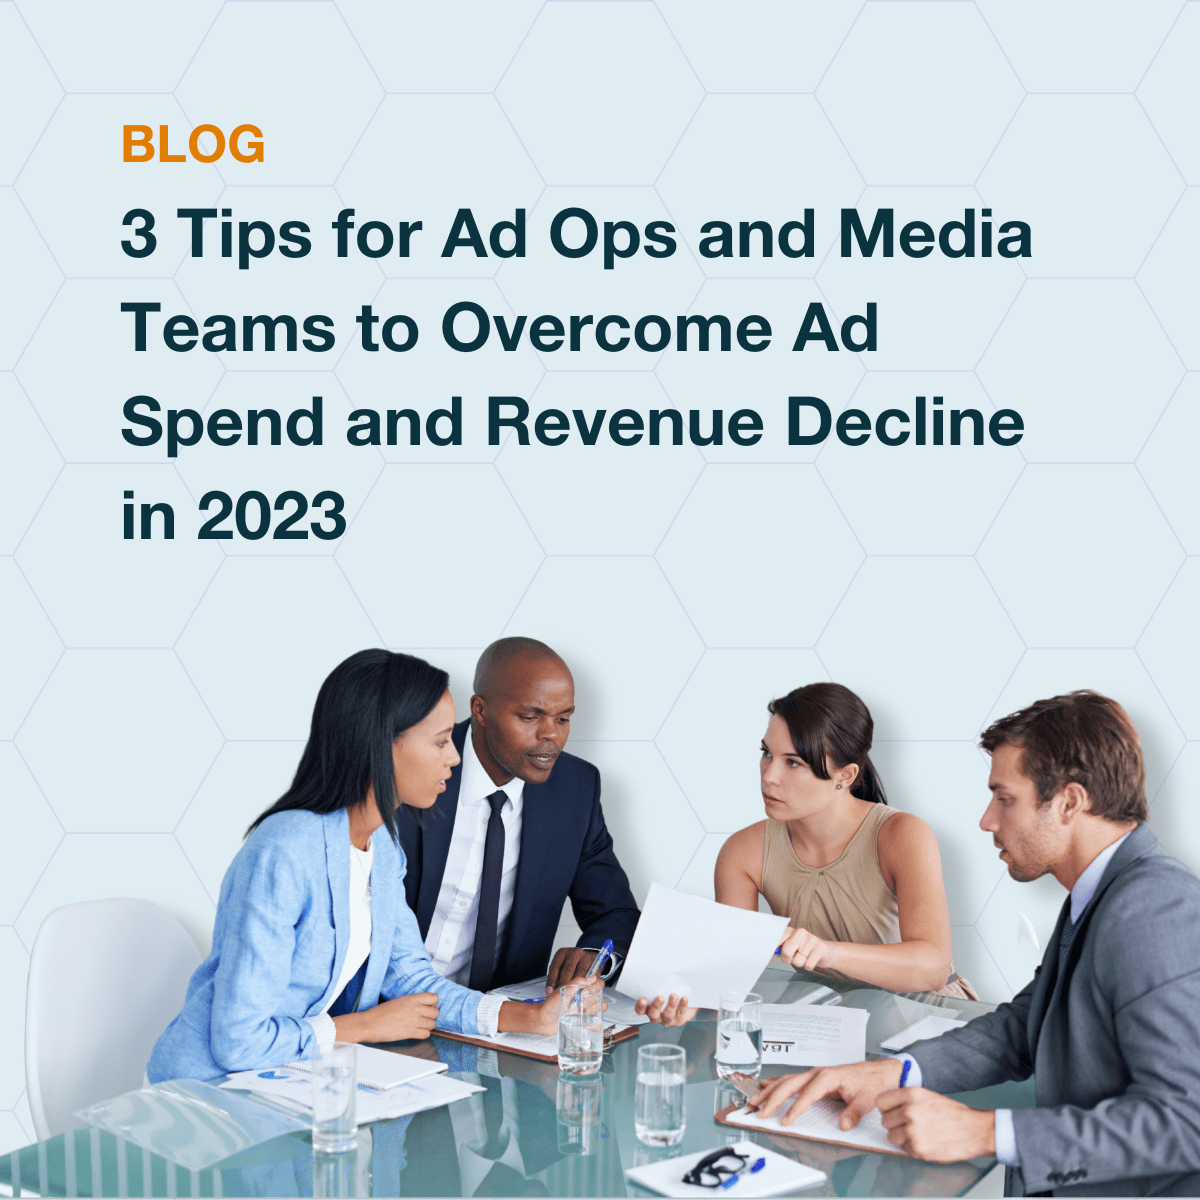 3 Tips for Ad Ops and Media Teams to Overcome Ad Spend and Revenue Decline in 2023